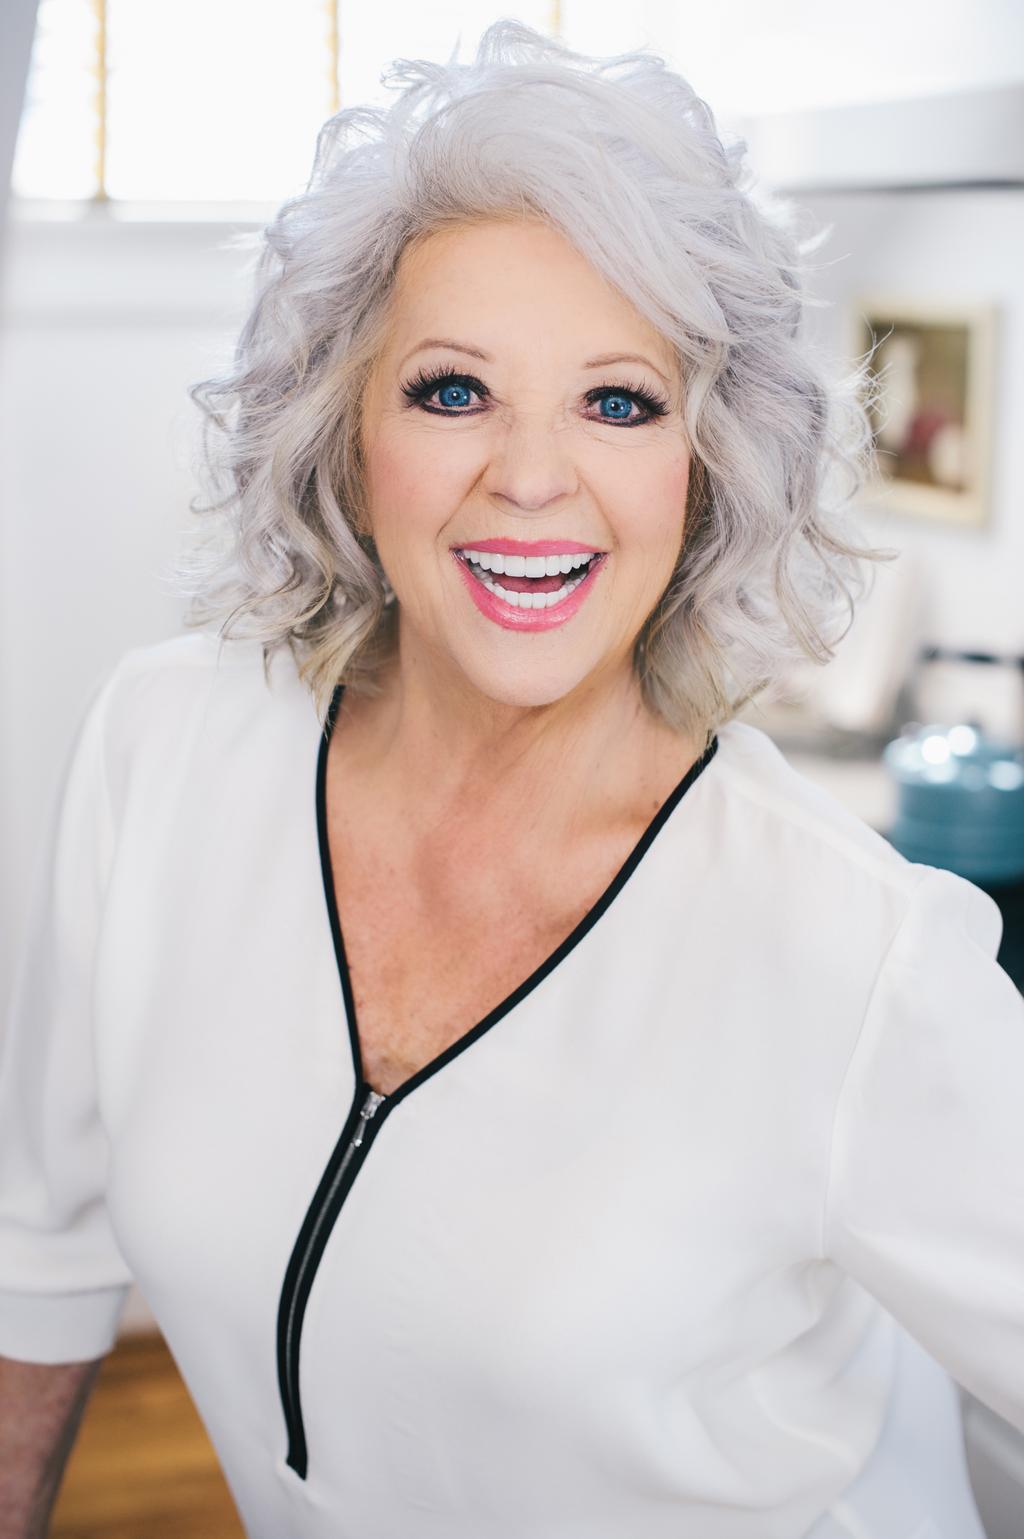 Meet Paula Deen Culinary icon Paula Deen is a selfmade entrepreneur who learned her savory secrets from her grandmother.